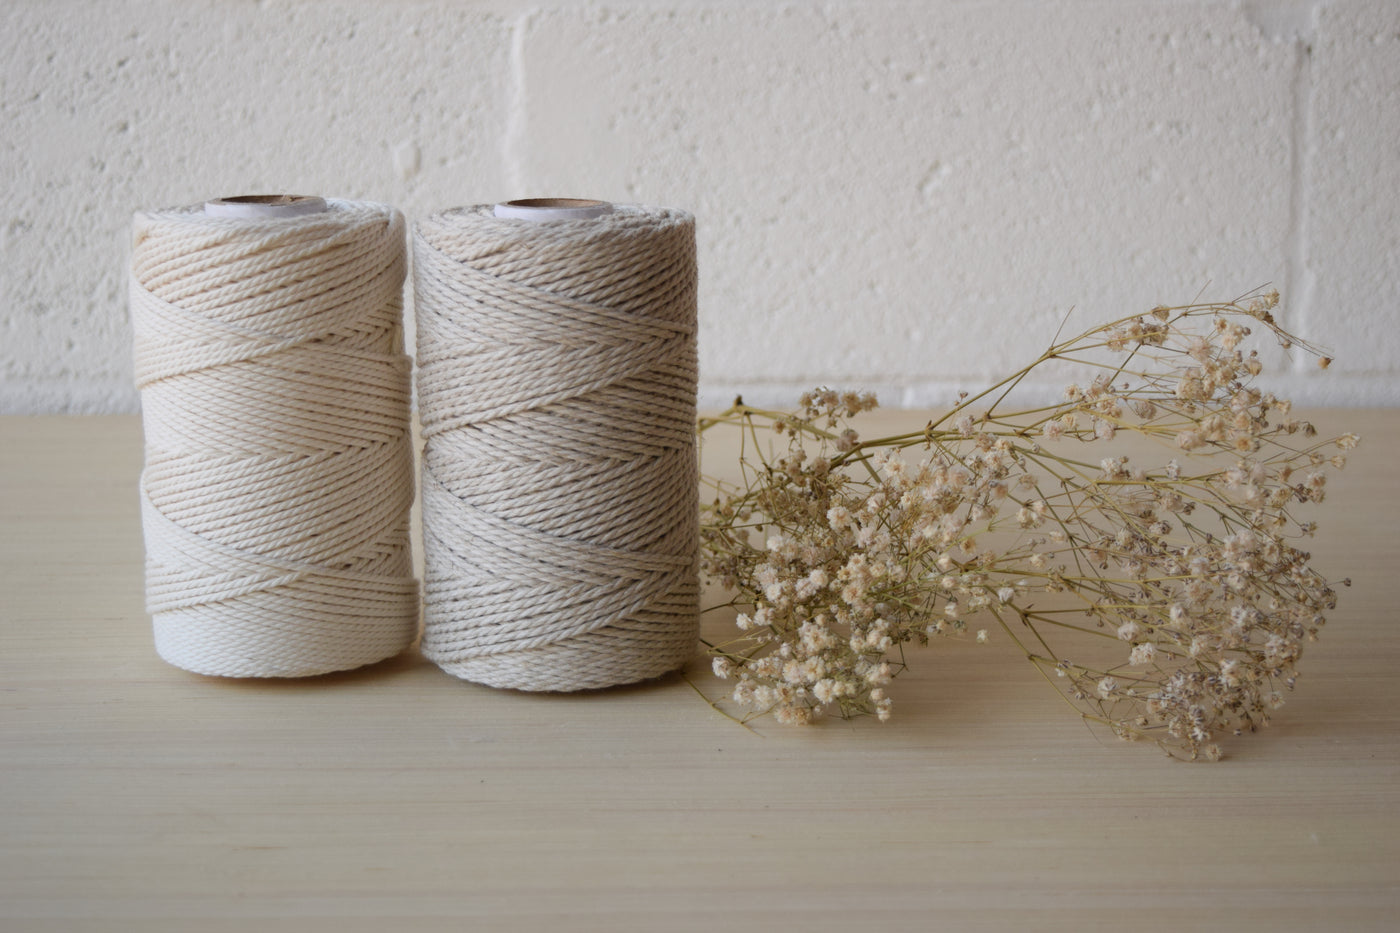 COTTON ROPE ZERO WASTE 2 MM - 3 PLY - NATURAL COLOR